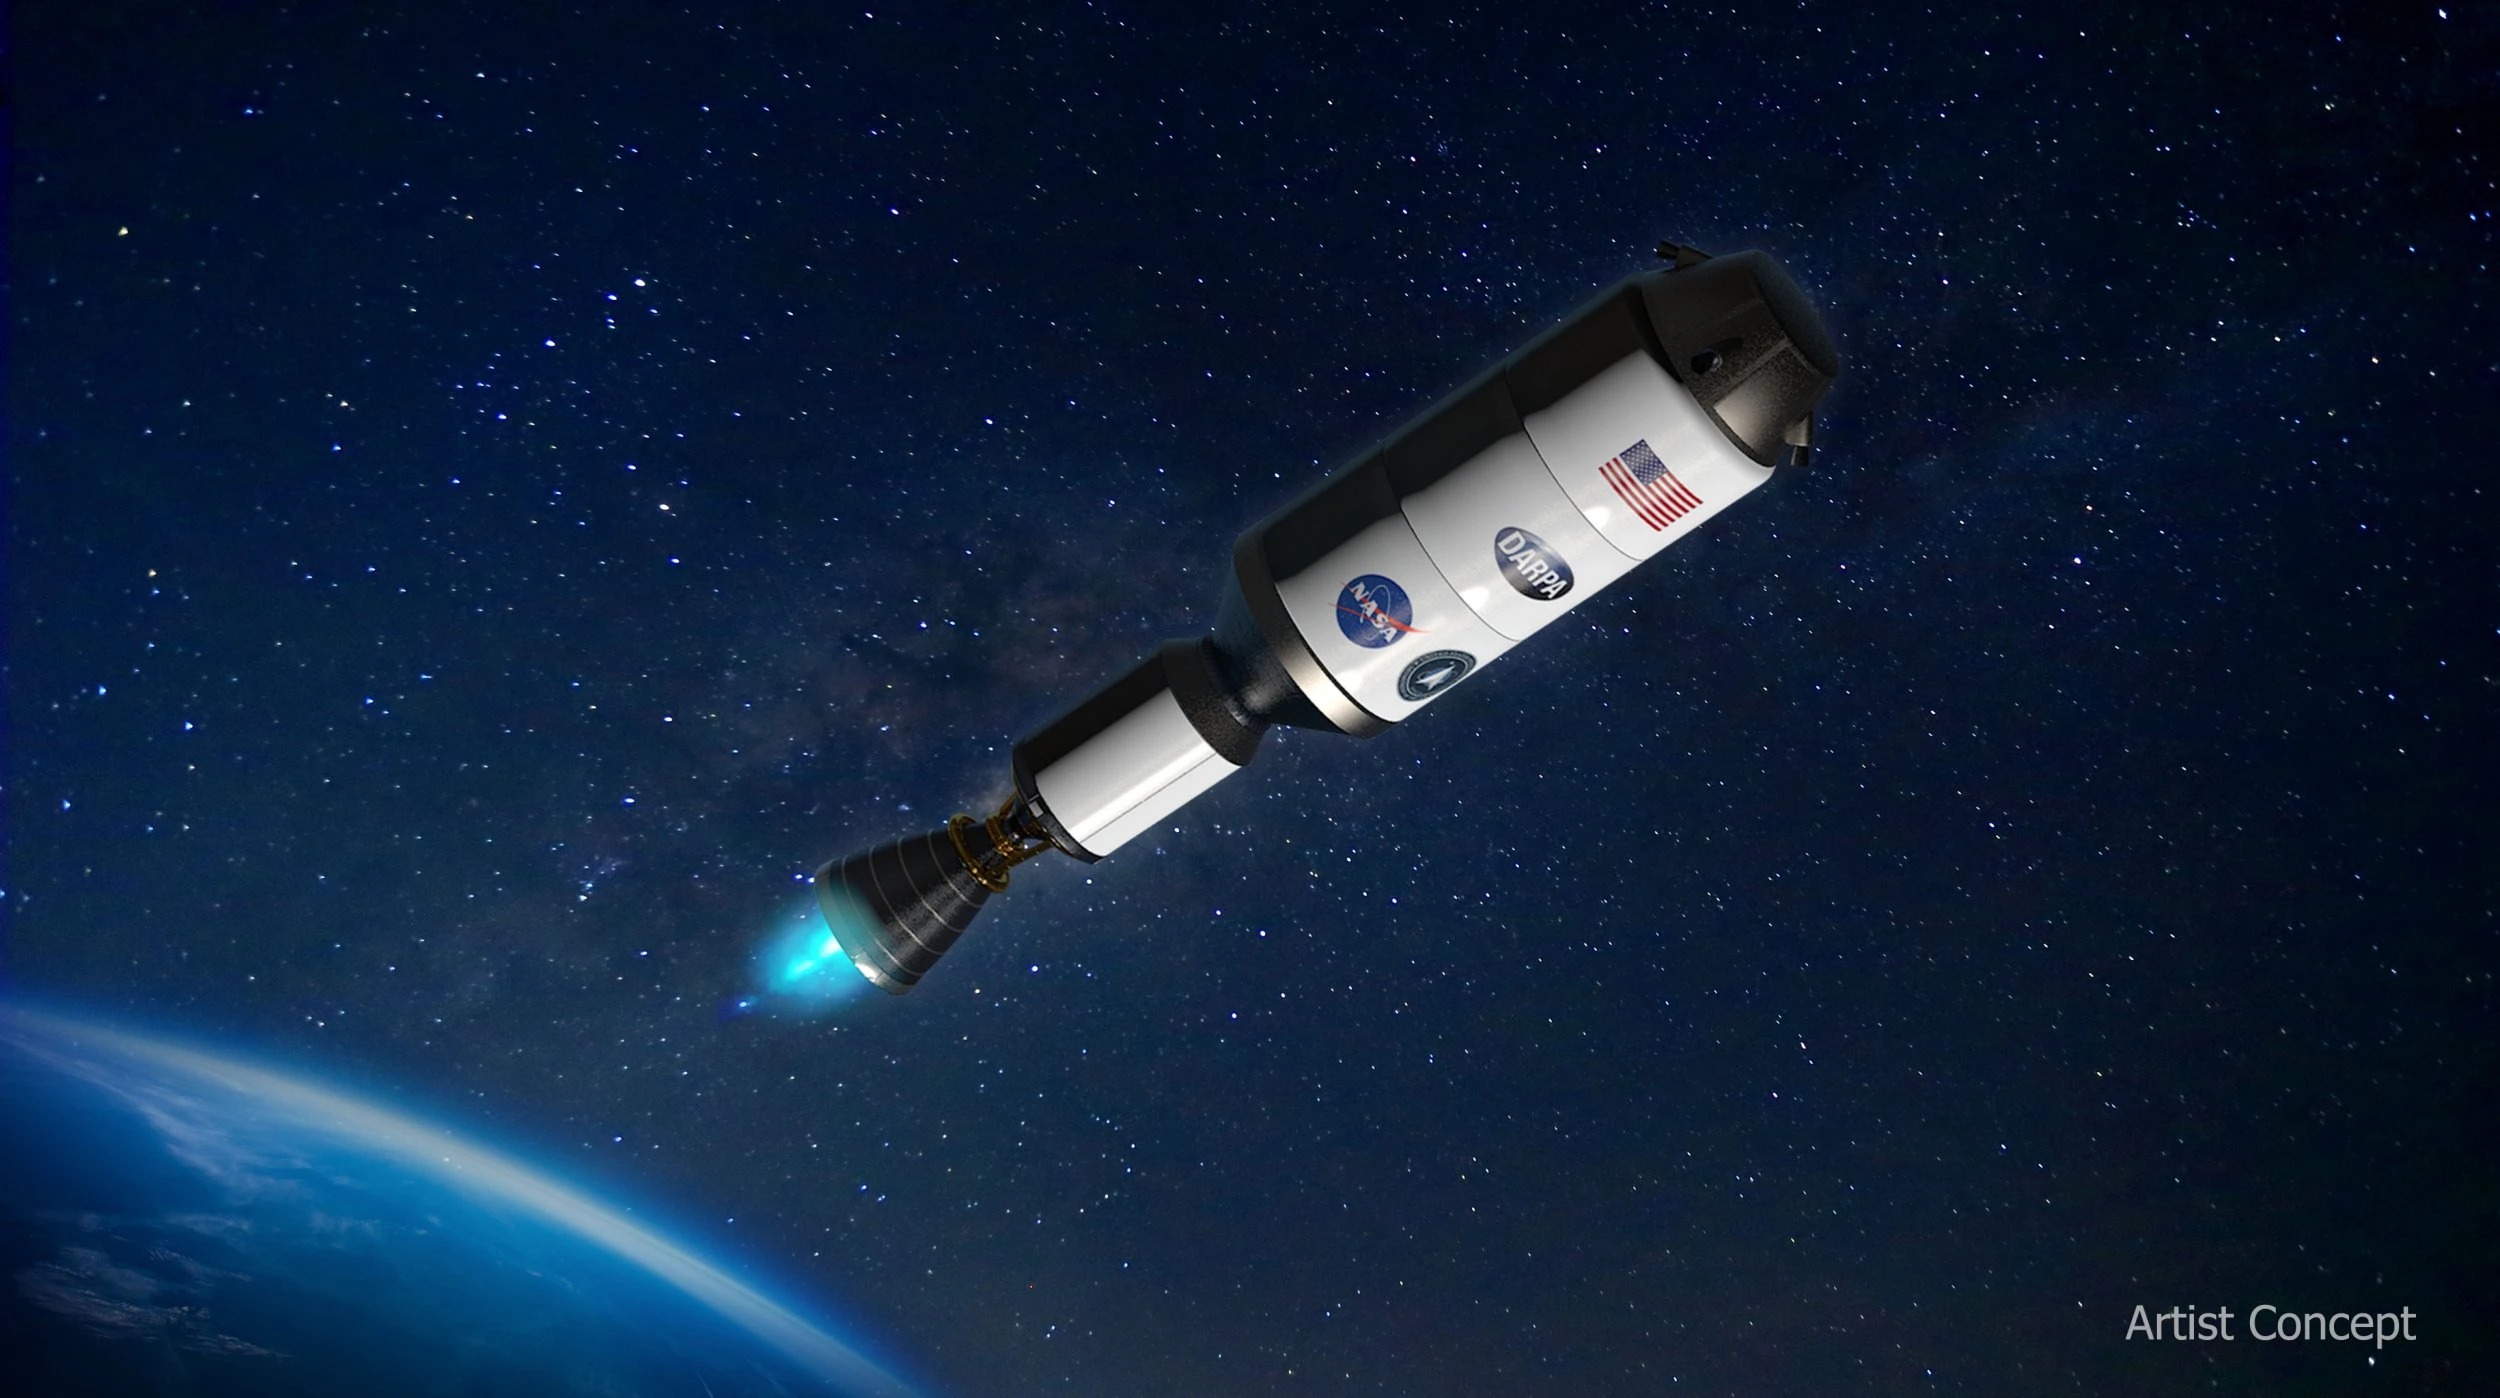 NASA Plans to Develop Nuclear Fission-Powered Spacecraft by 2027